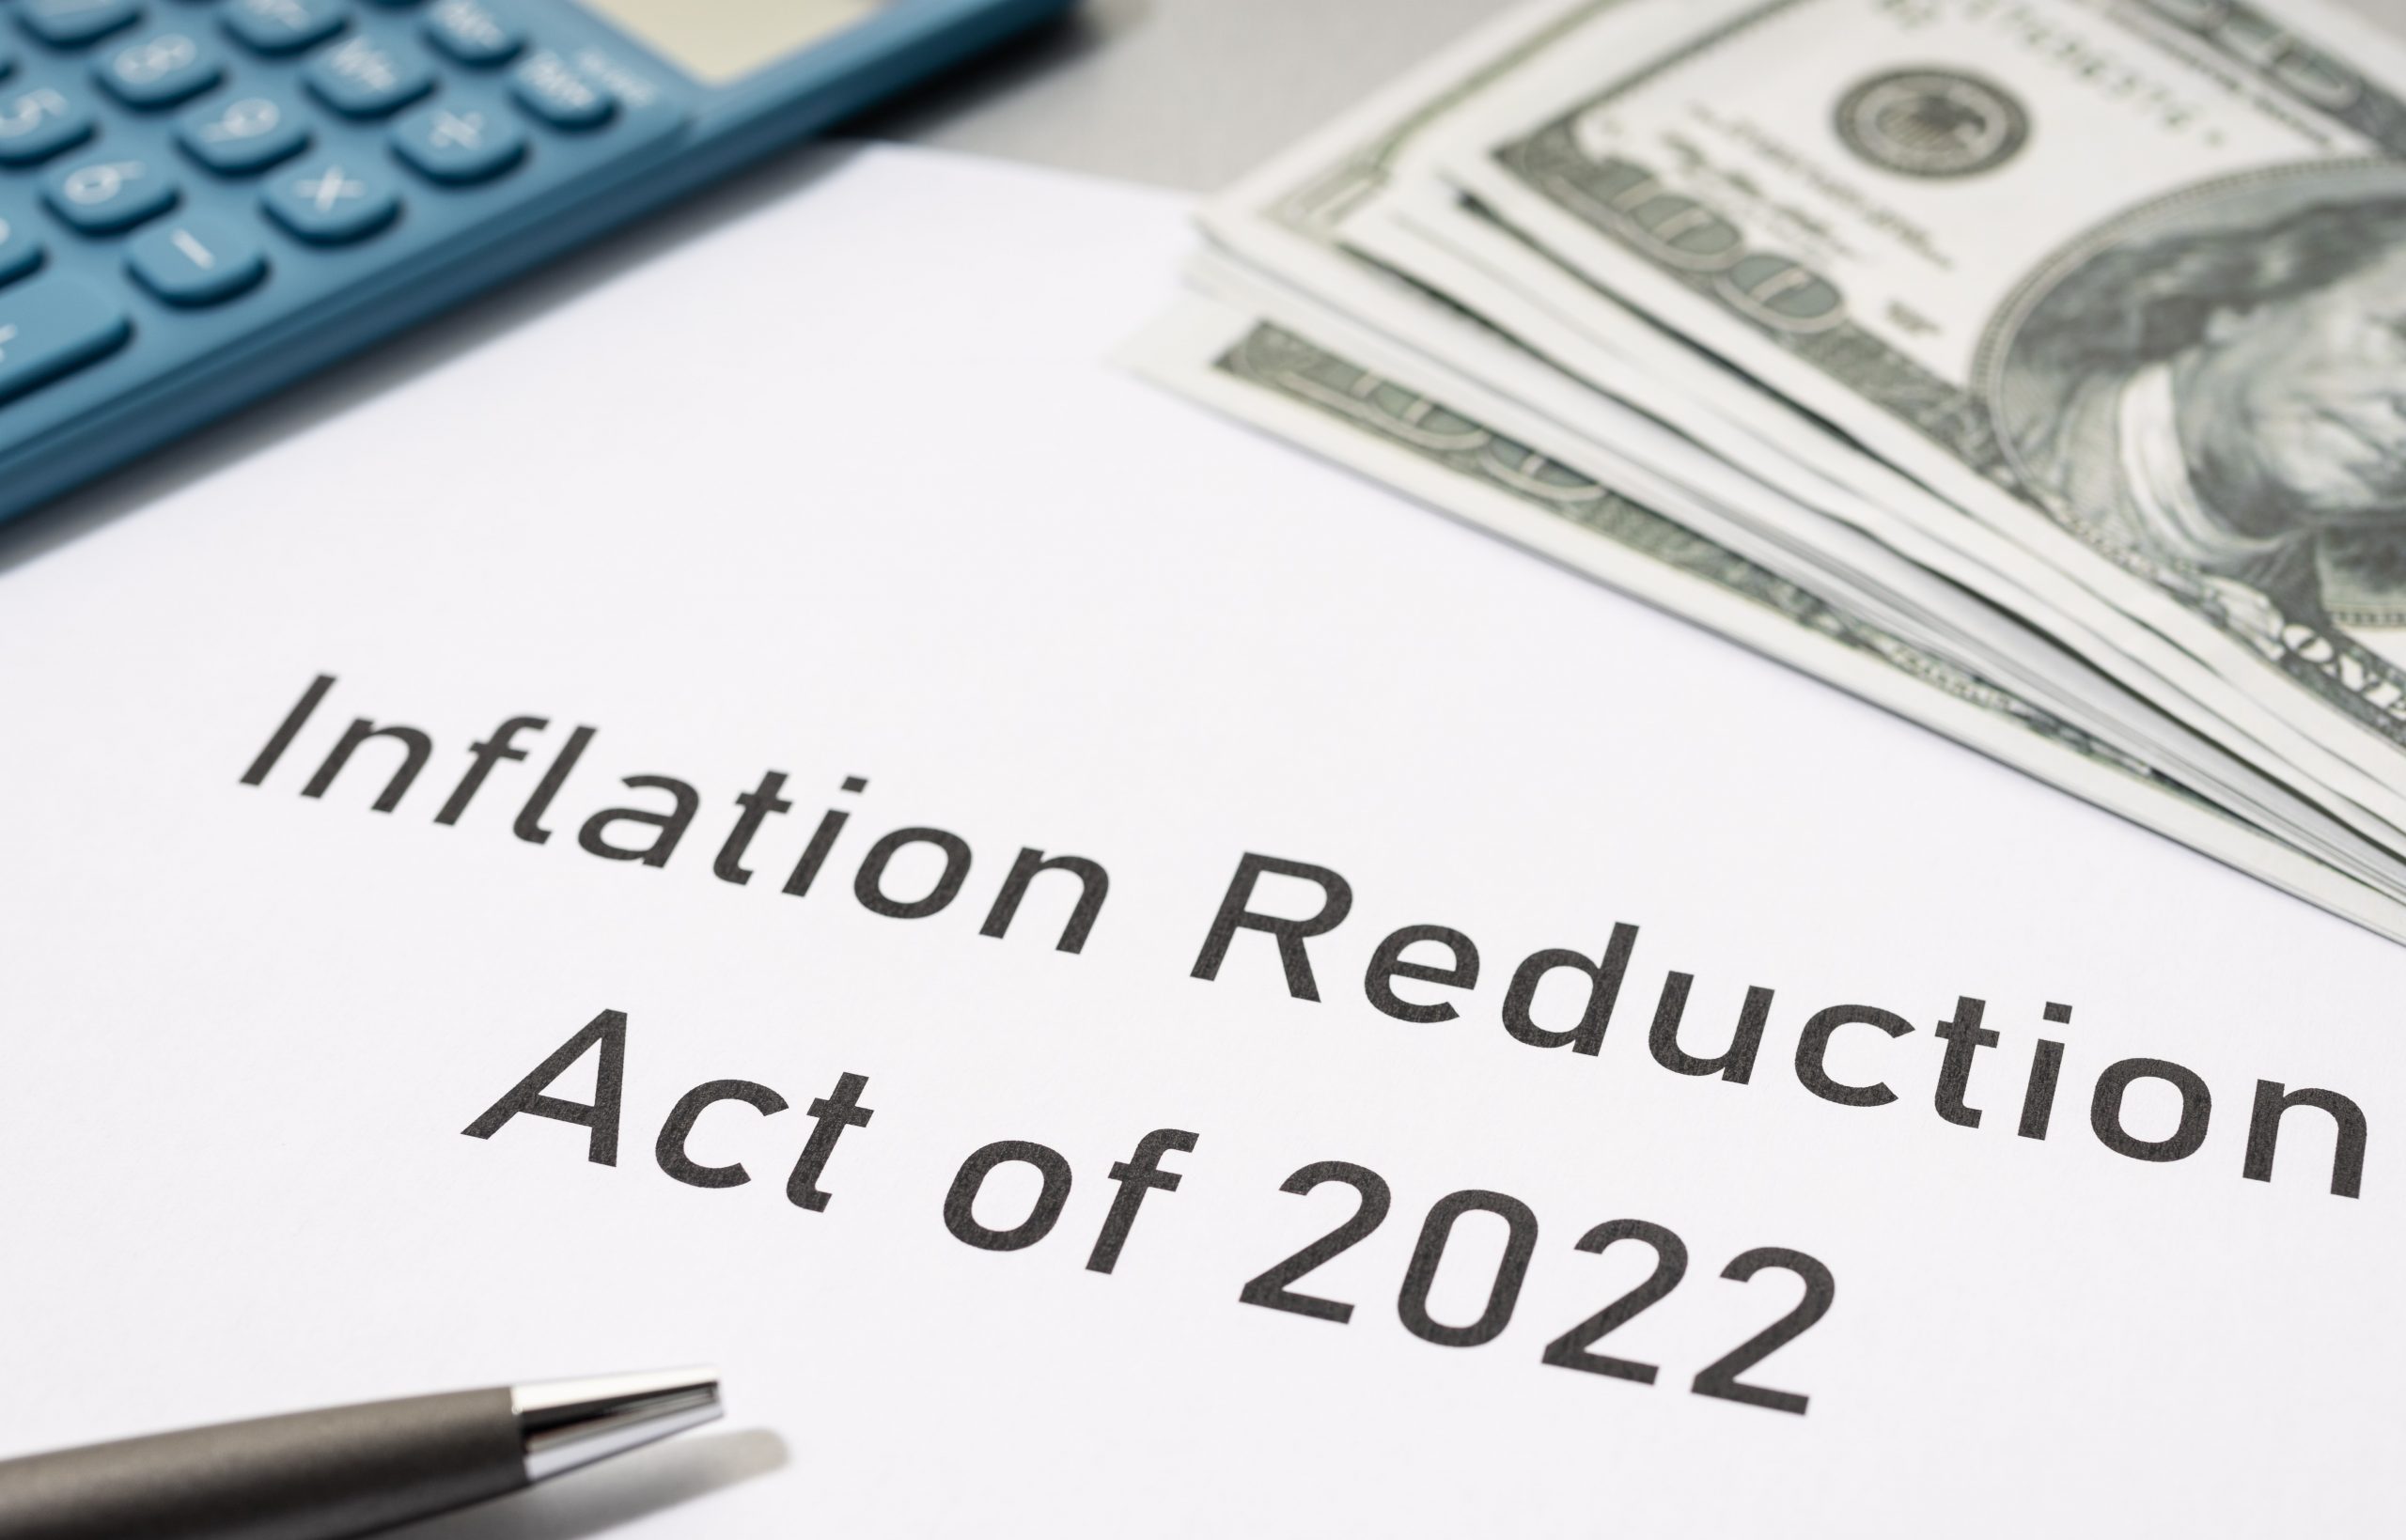 Inflation reduction act